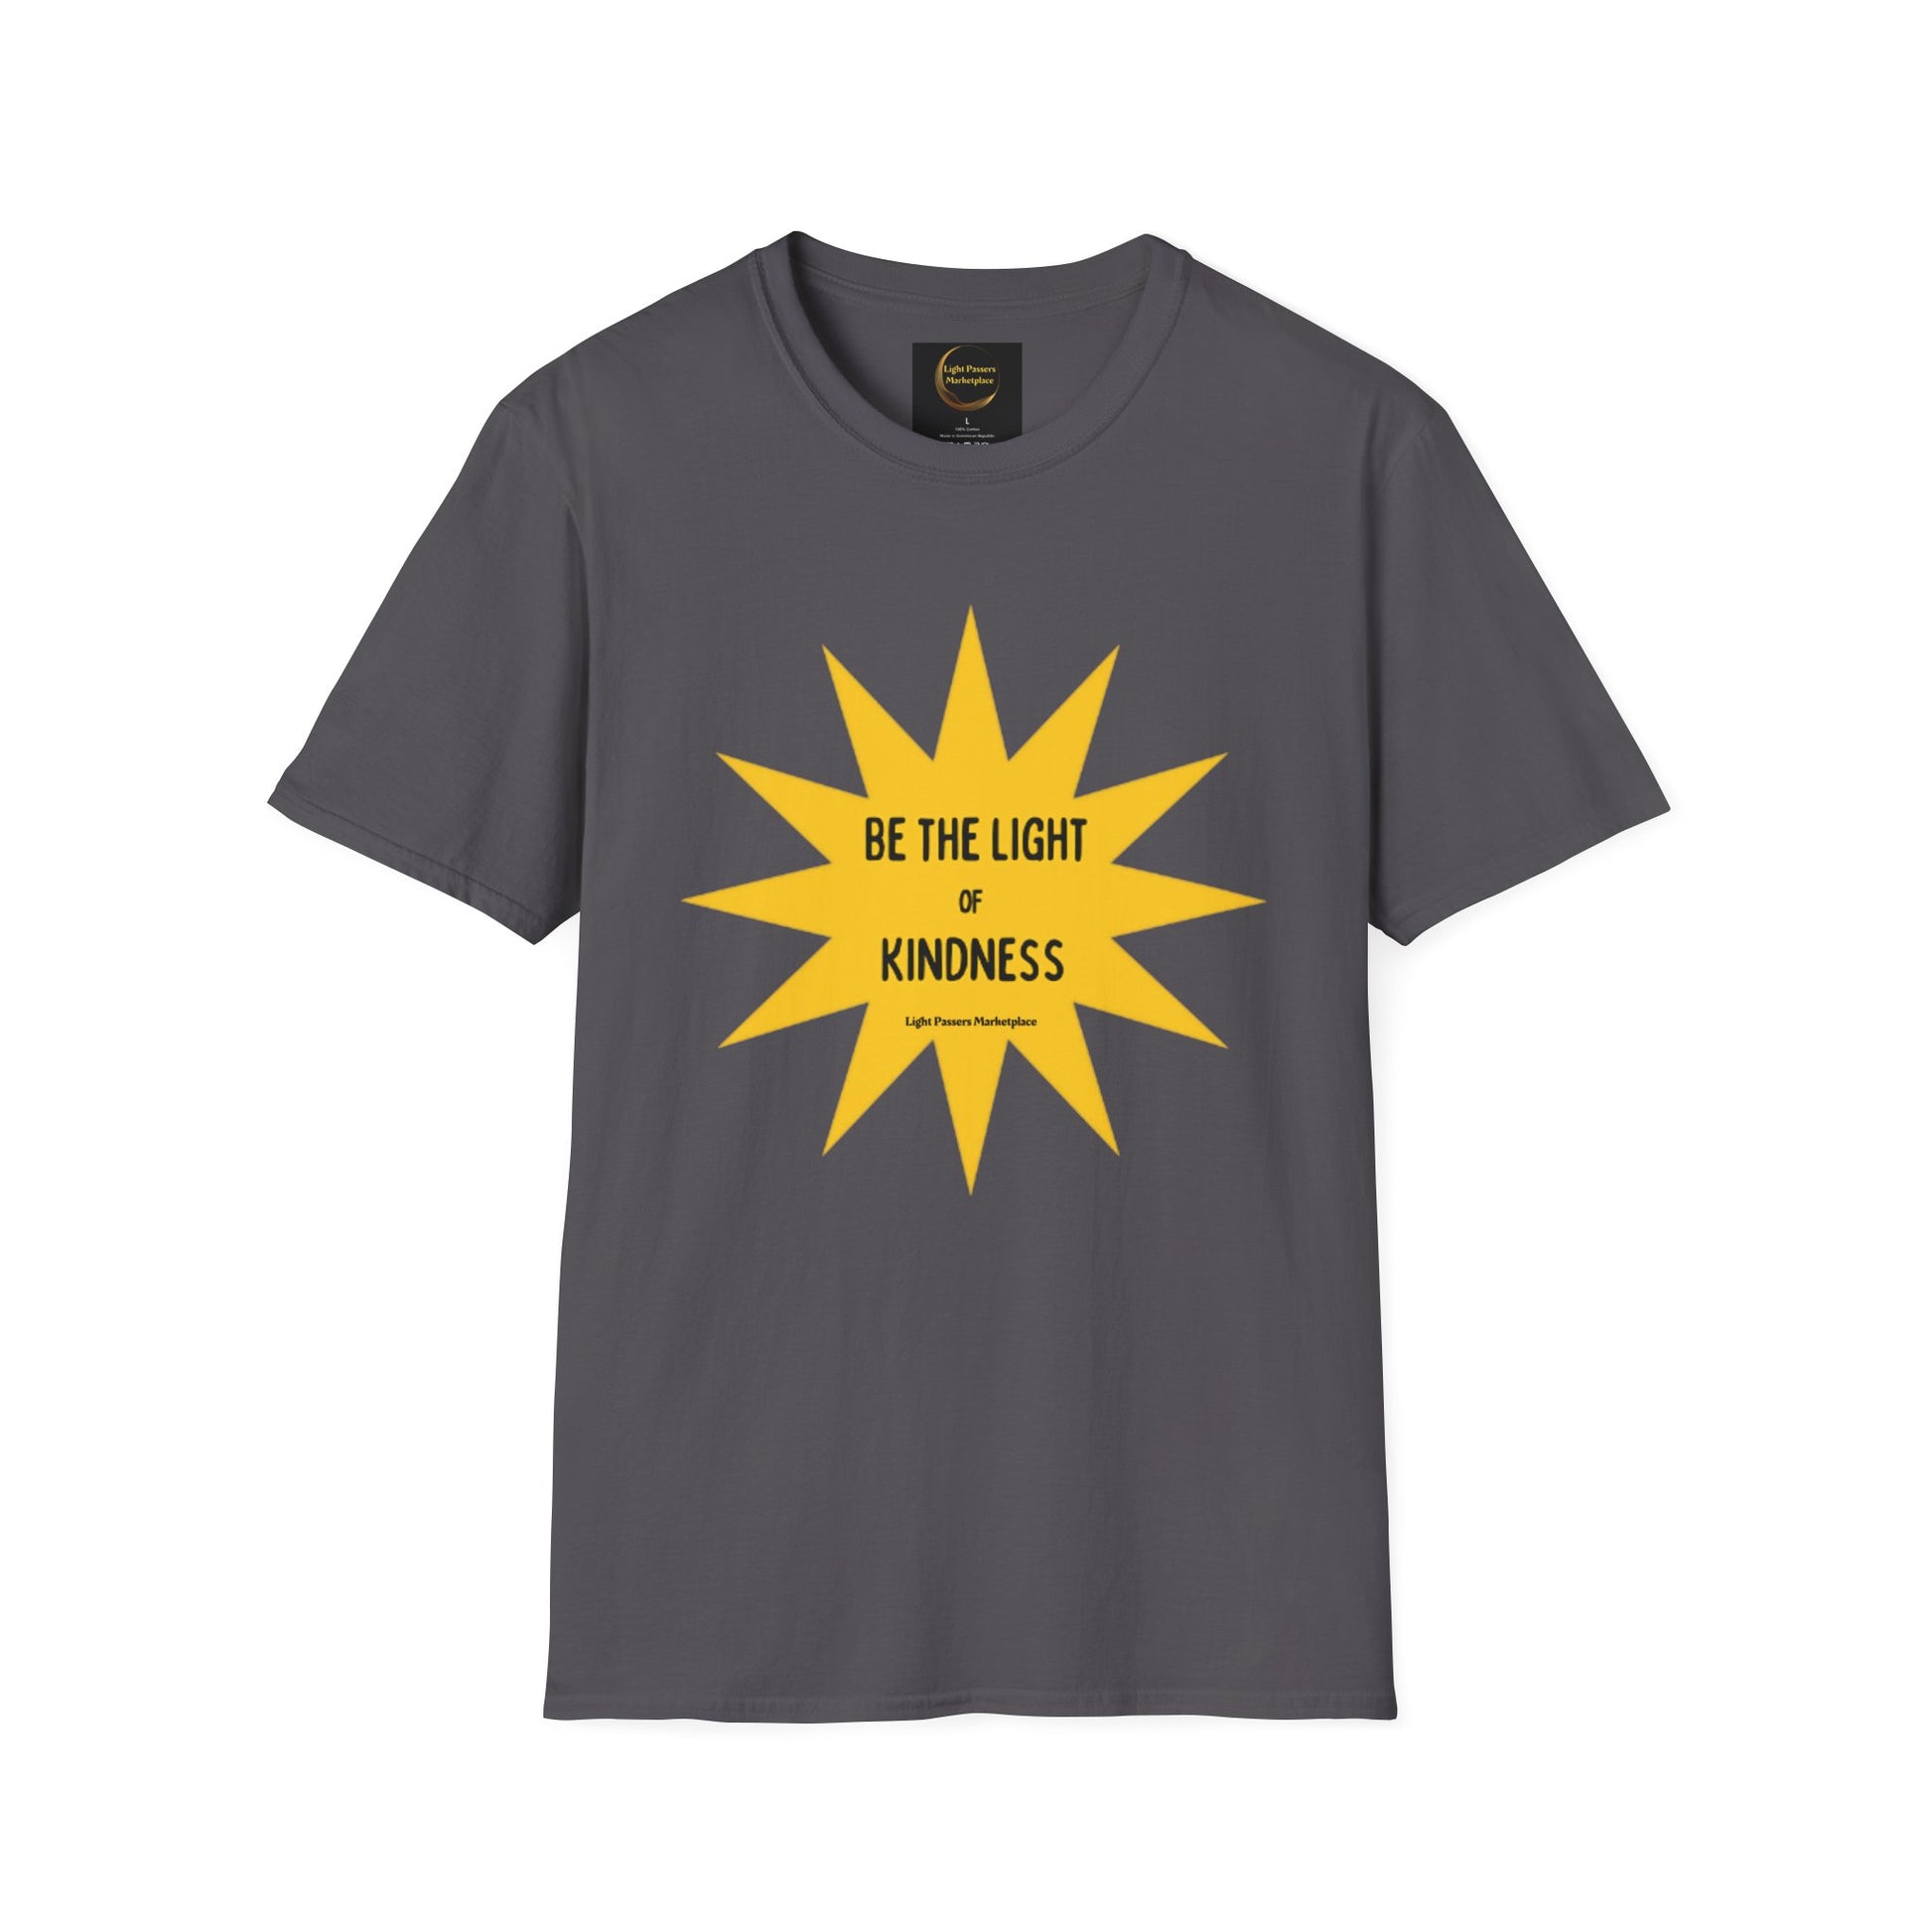 Unisex grey t-shirt featuring a yellow sun design and a star with black text. Made of 100% cotton with no side seams for comfort. Ideal for casual wear with a tear-away label.